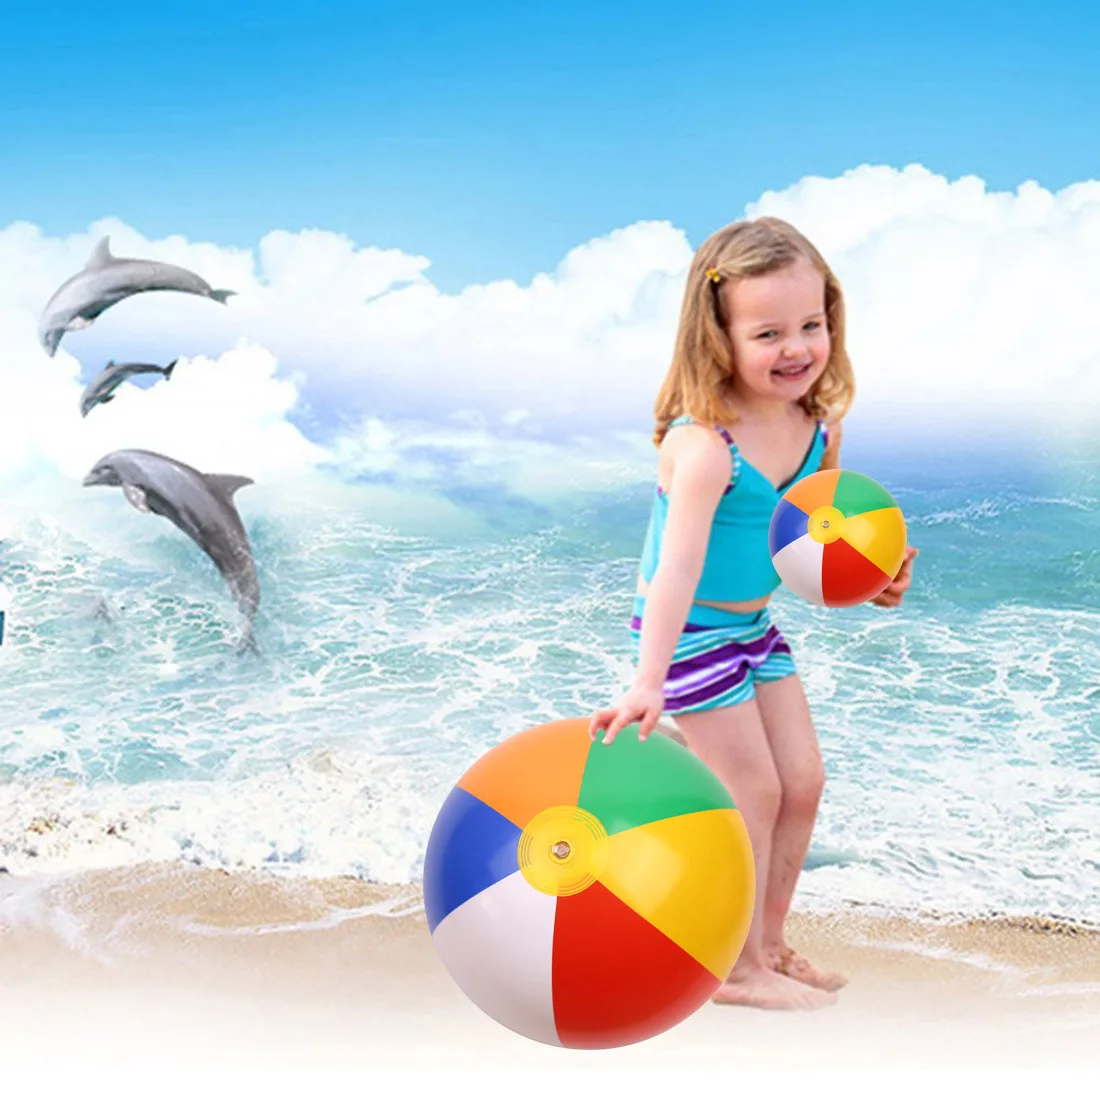 72 NEW MULTI COLORED MINI BEACH BALLS 5" INFLATABLE POOL BEACHBALL PARTY FAVORS 